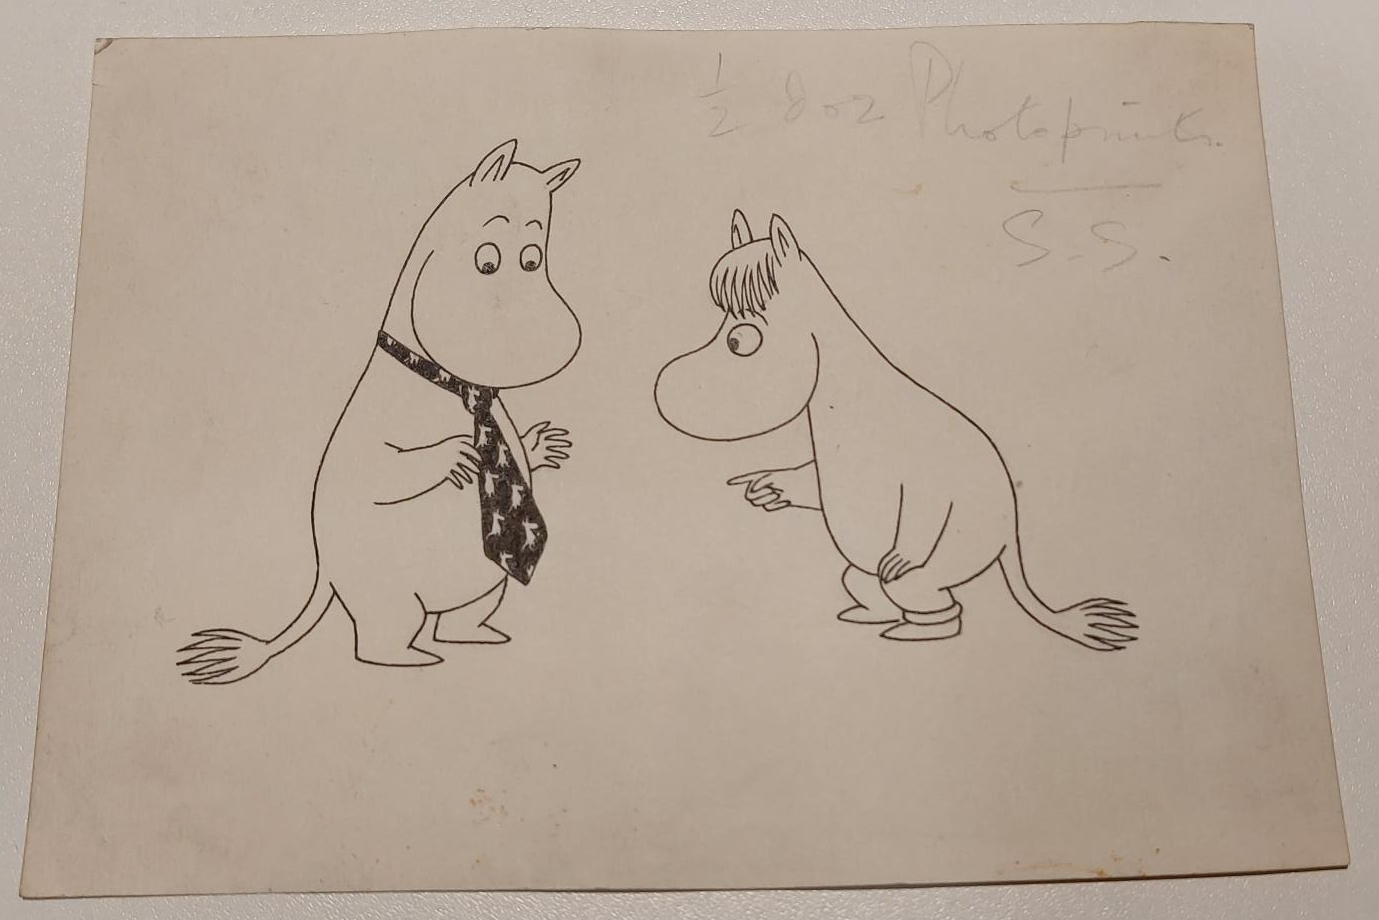 Drawing of two moomins by Tove Janssen. Moomintroll is standing wearing a neck tie with moomins on it, facing Snorkmaiden who is looking and pointing at the tie. 